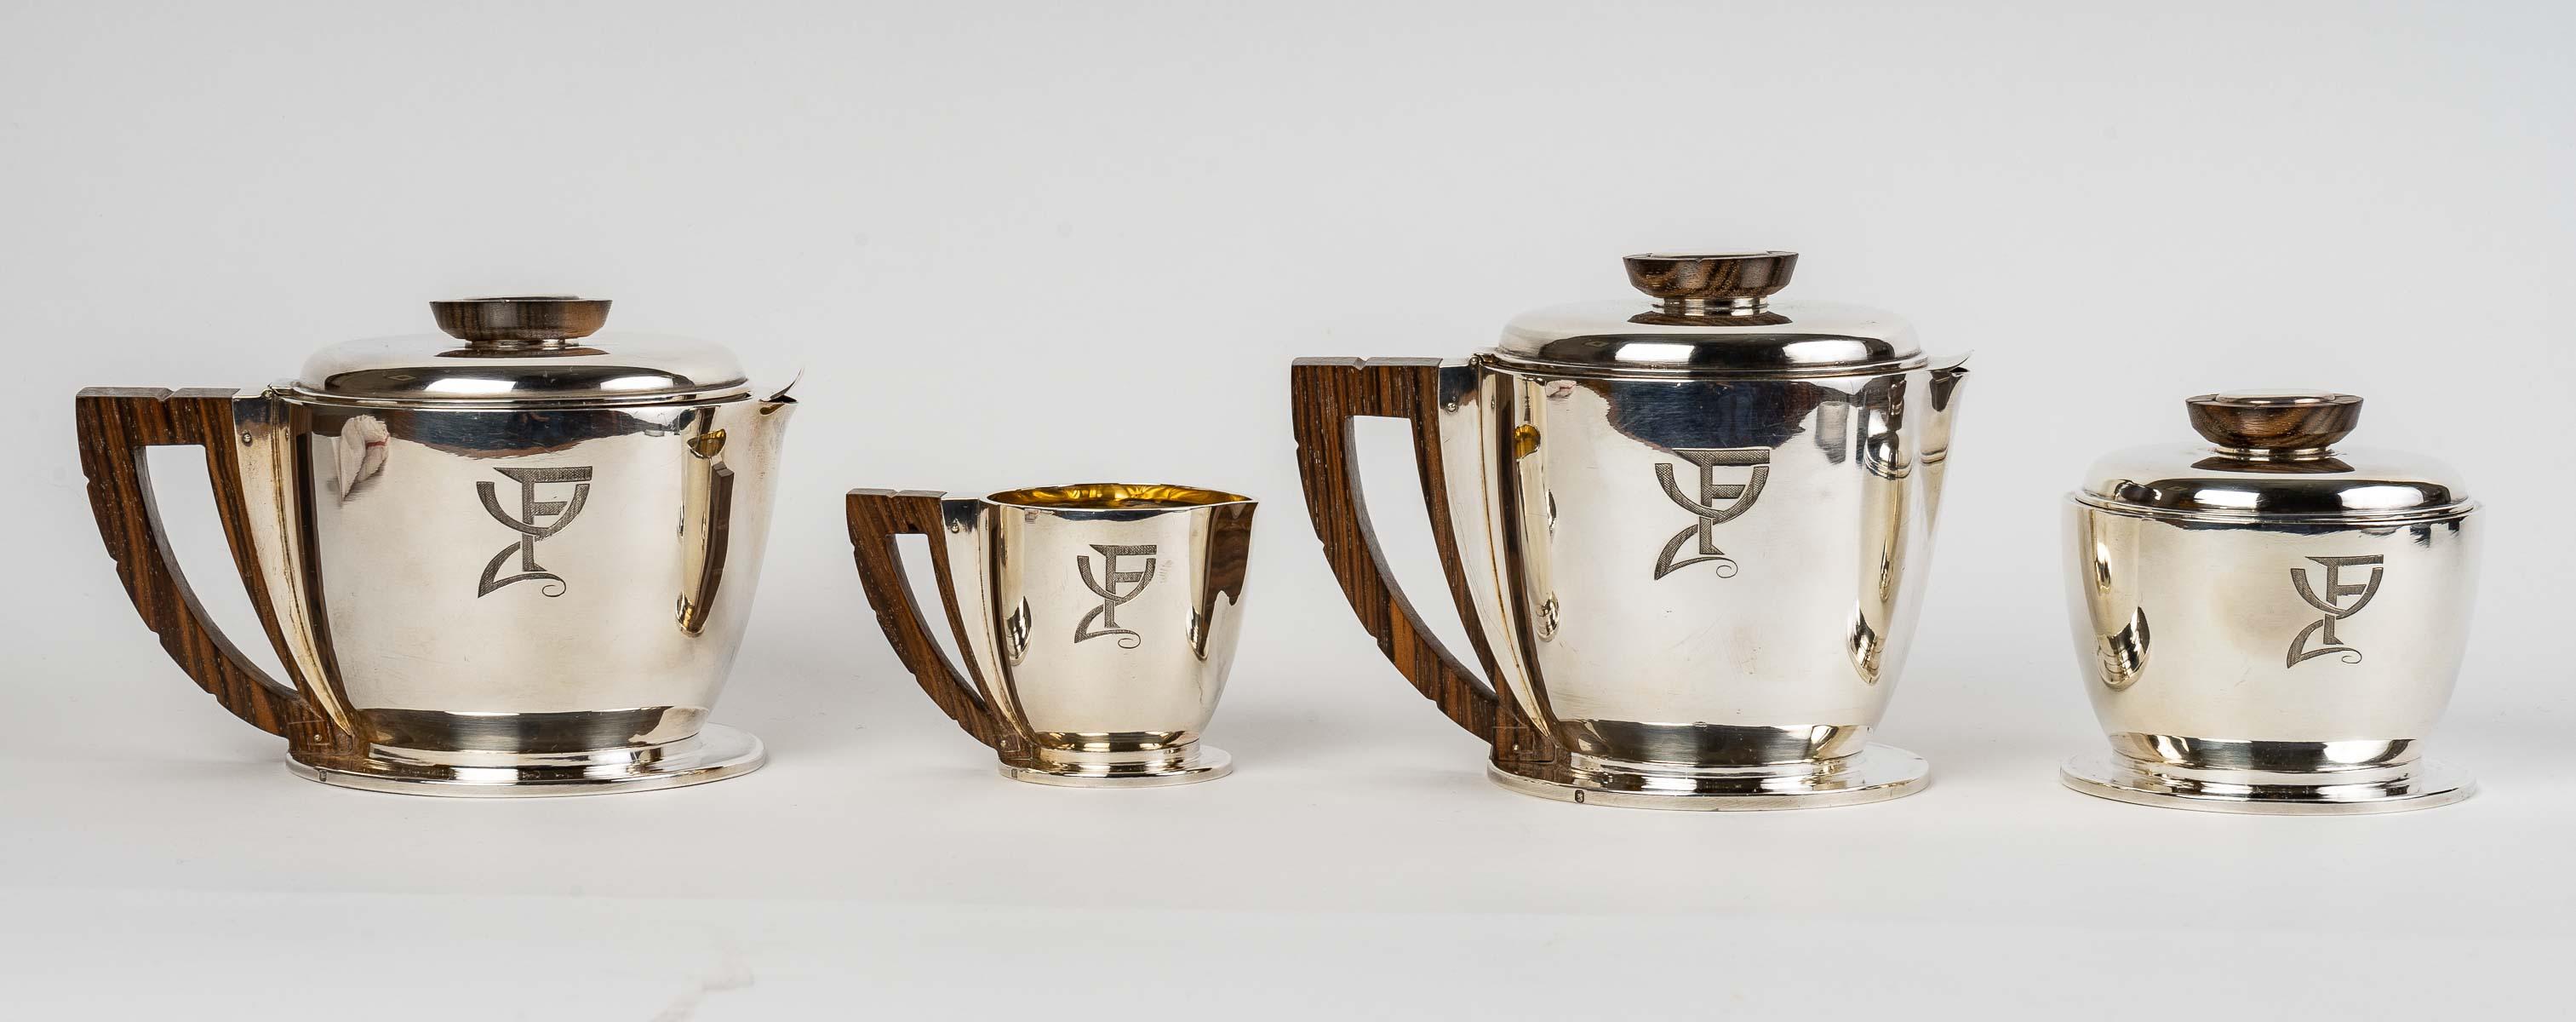 Tea and coffee service in sterling pure silver and macassar by Jean E. Puiforcat created in the 1920s.

Service including:
- a coffee pot : 11 cm x 10 cm
- a teapot : 10 cm x 9.5 cm
- a milk-pot : 5.5 cm x 5.5 cm
- a sugar pot : 8 cm x 8